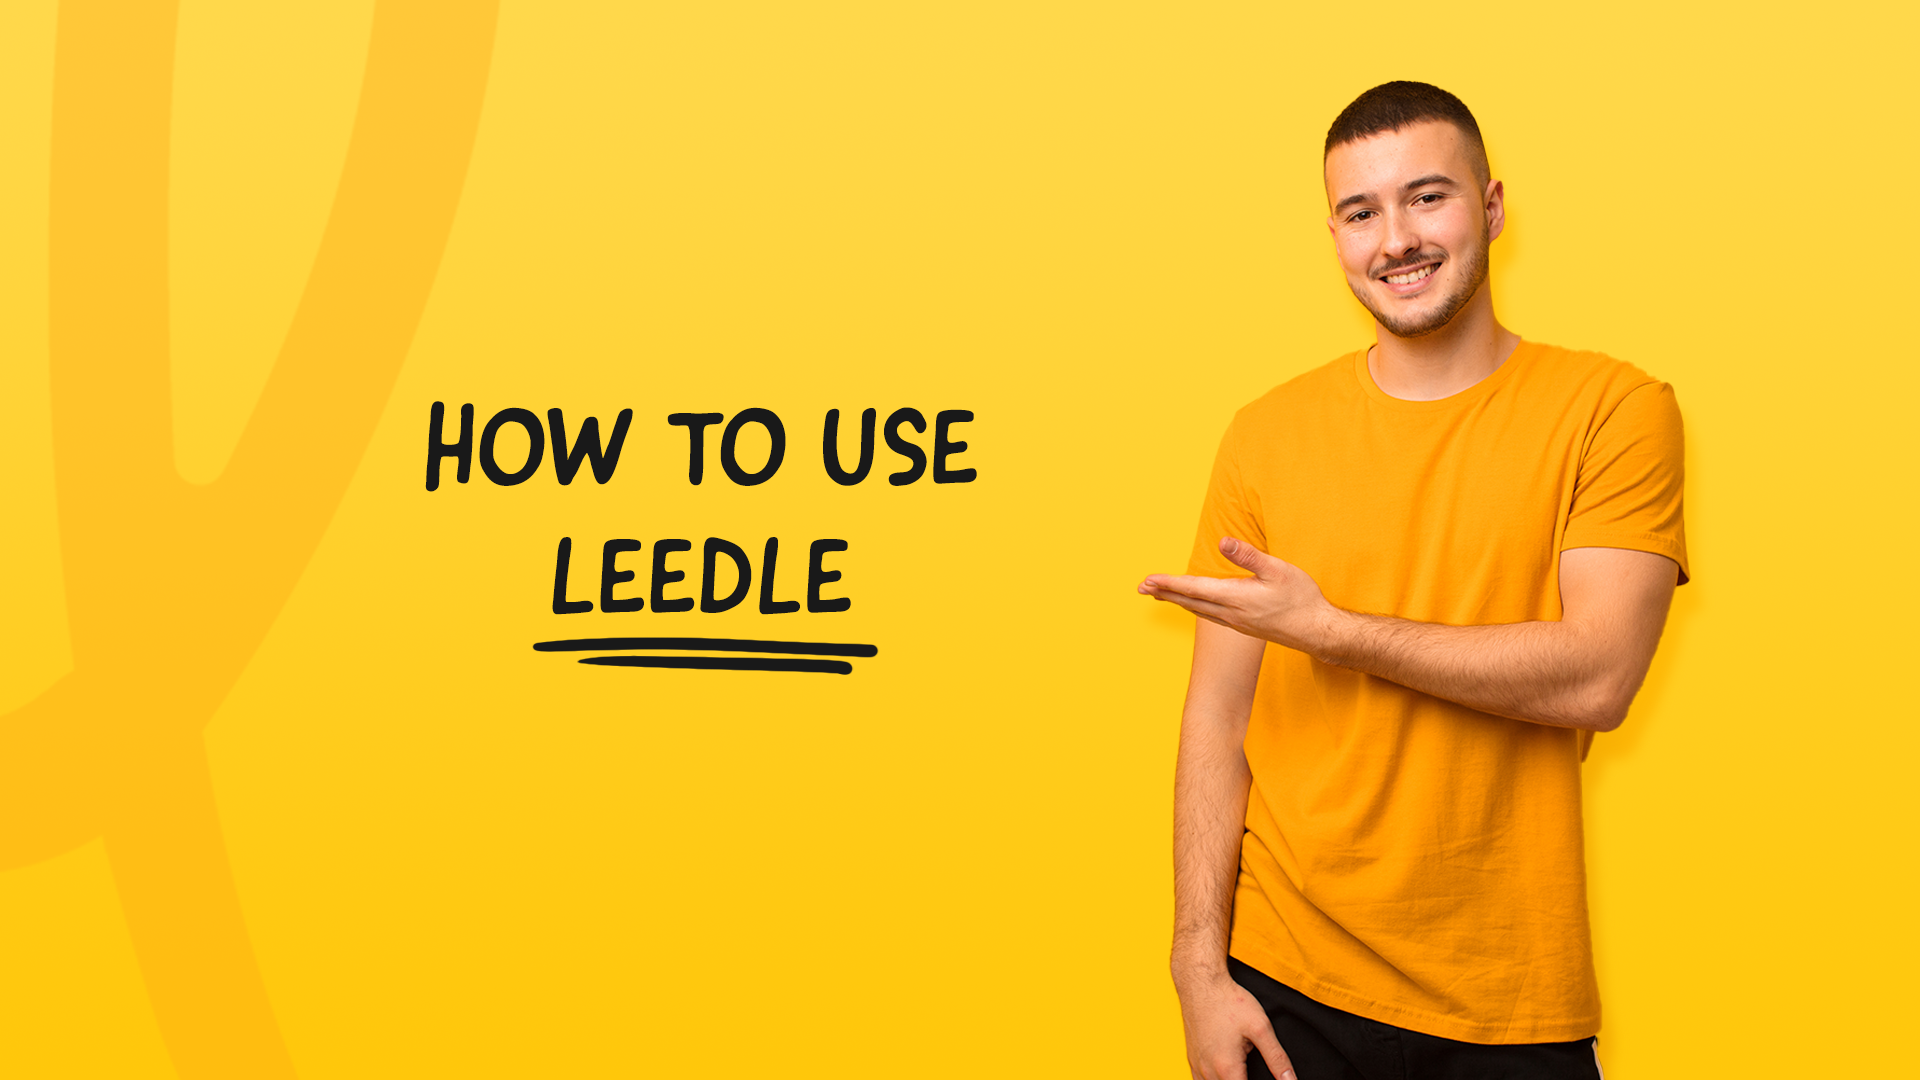 This is how to use Leedle